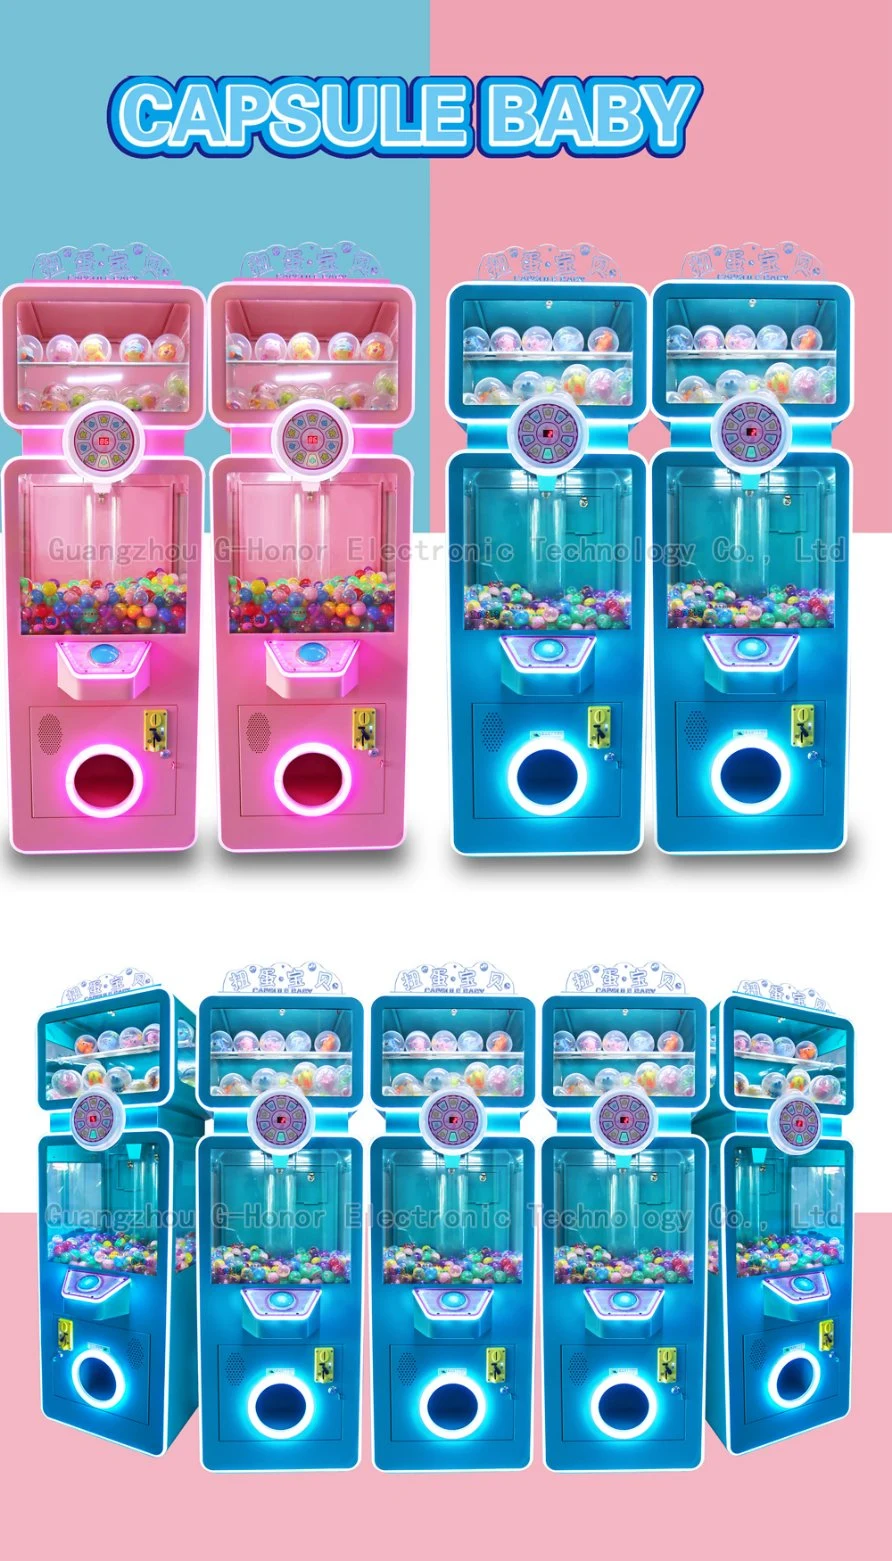 Hot Selling Capsule Game Arcade Prize Vending Game Coin Operated Capsule Toys Game Console Gashapon Game Machine Capsule Vending Game Machine